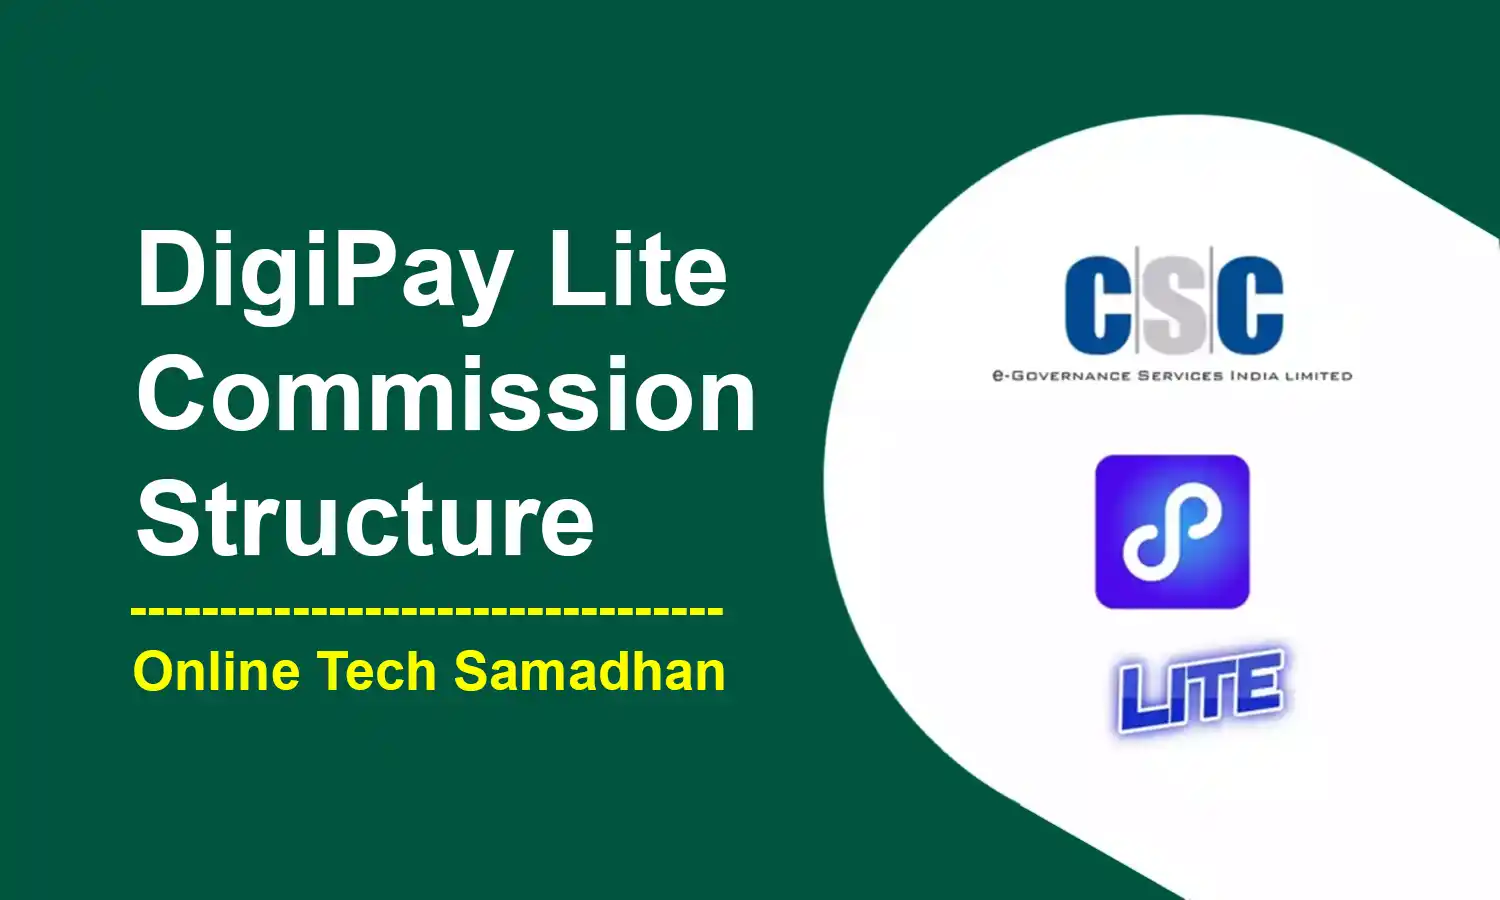 DigiPay Lite Commission Structure